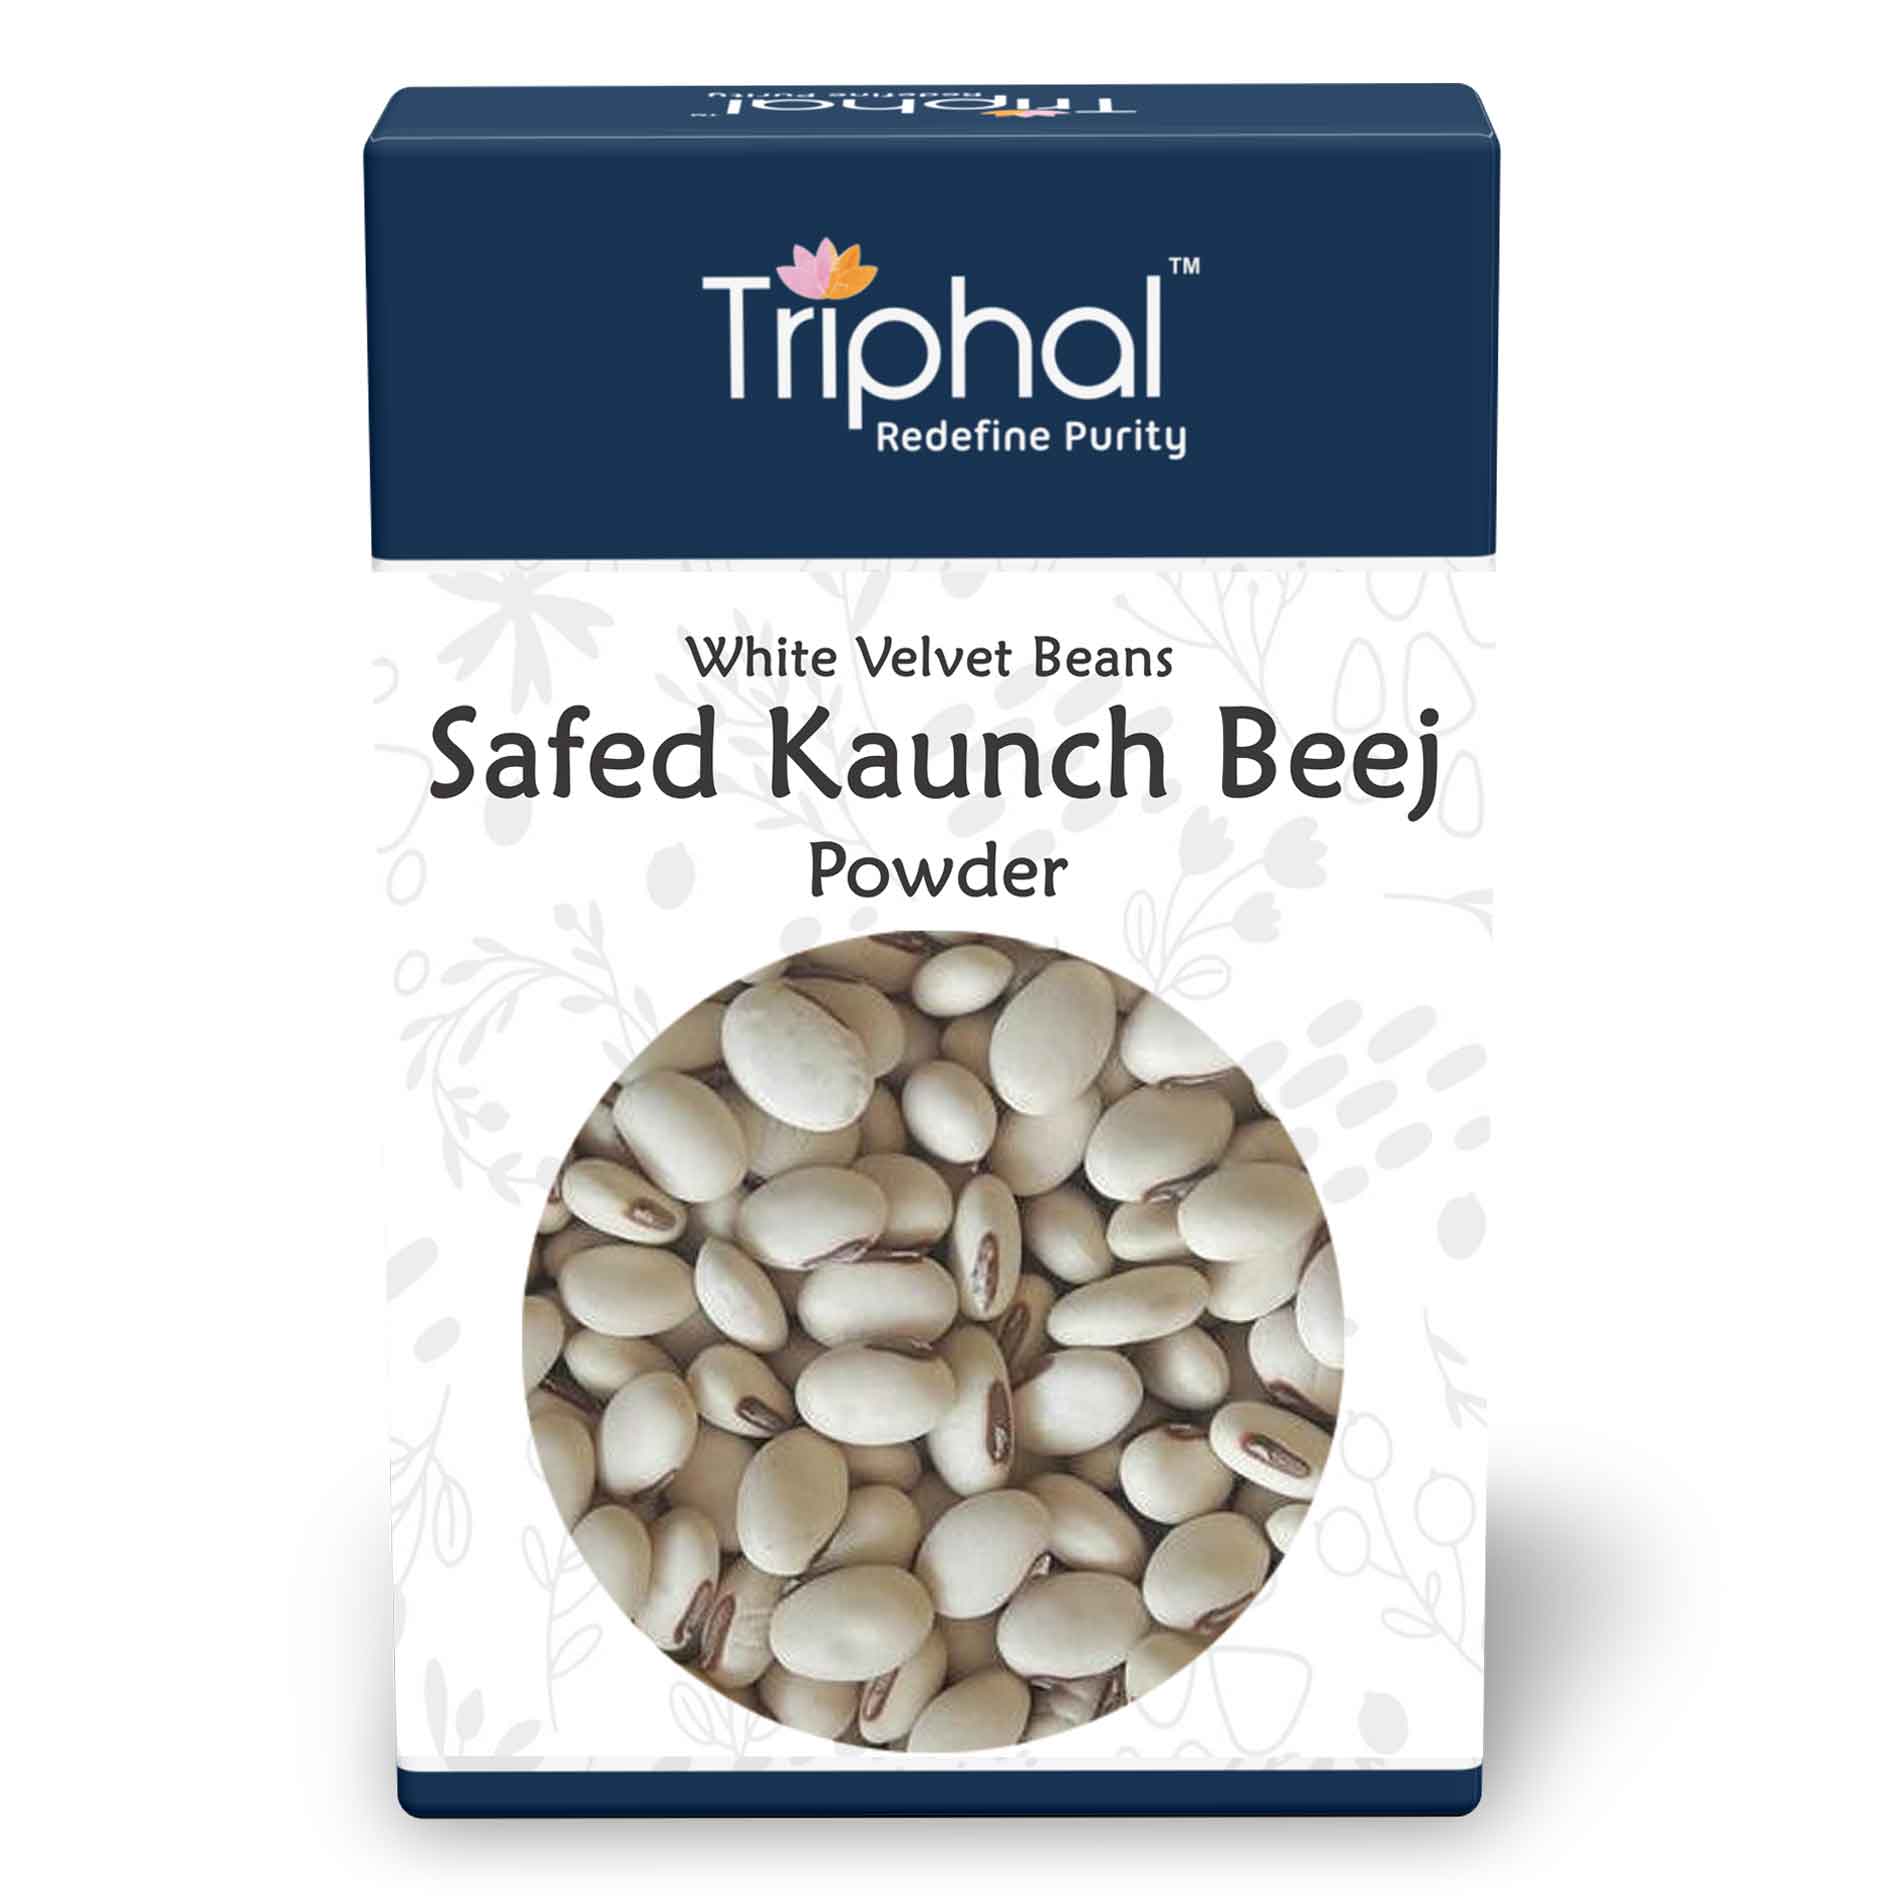 Safed kaunch beej powder by Triphal - 100% original and pure